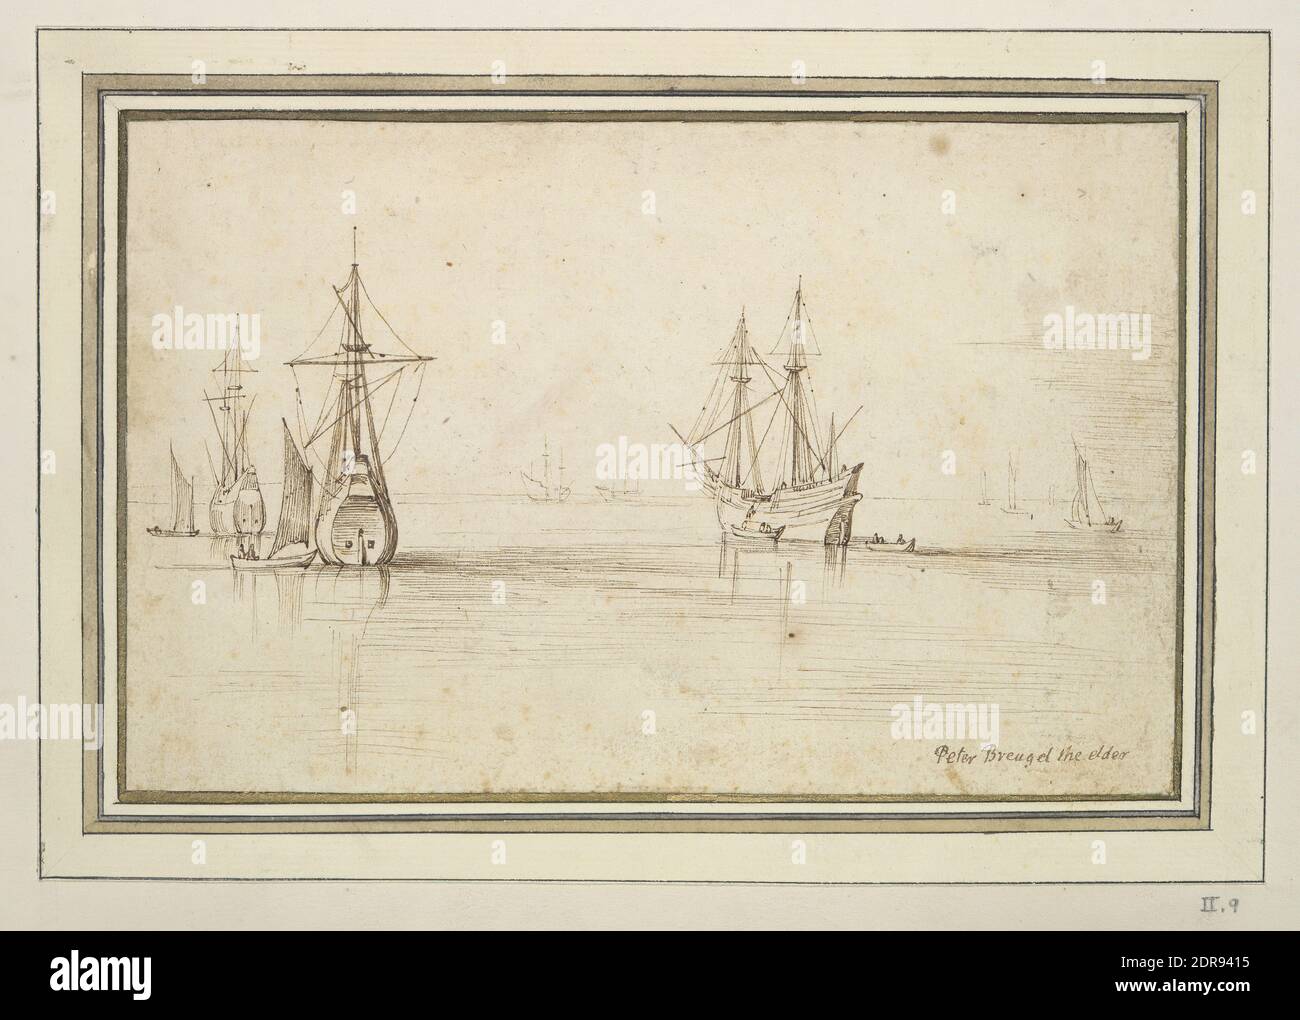 After: Jan Brueghel the Elder, Flemish, 1568–1625, Seagoing Vessels at Anchor in Calm Water, Pen and brown ink over preliminary drawing in black chalk or graphite, sheet: 11.8 × 18.5 cm (4 5/8 × 7 5/16 in.), Made in Flanders, Flemish, 17th century, Works on Paper - Drawings and Watercolors Stock Photo